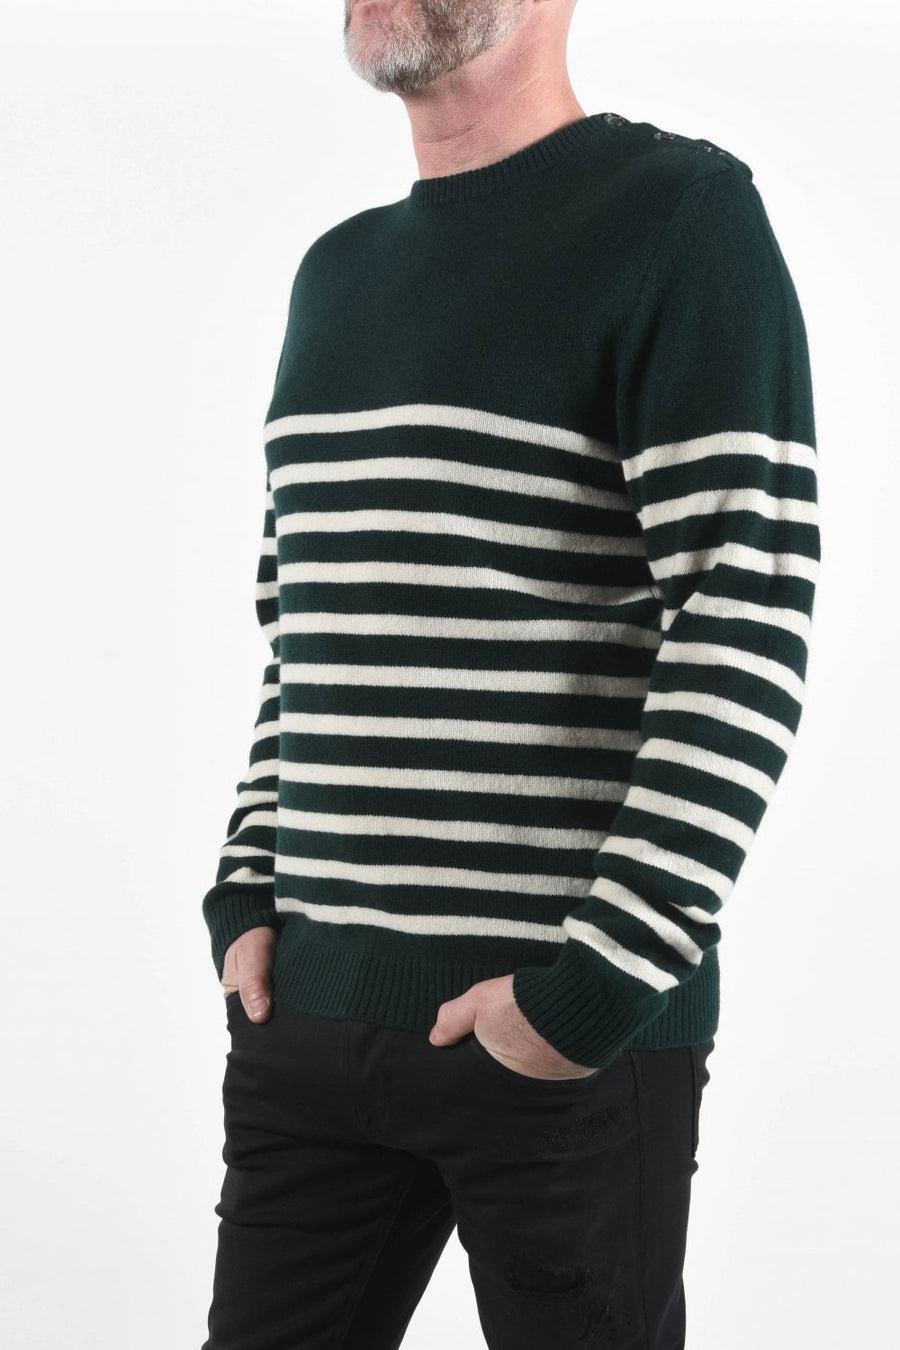 Buy the Daniele Fiesoli Side button neck Knit Green at Intro. Spend £100 for free next day UK delivery. Official stockists. We ship worldwide